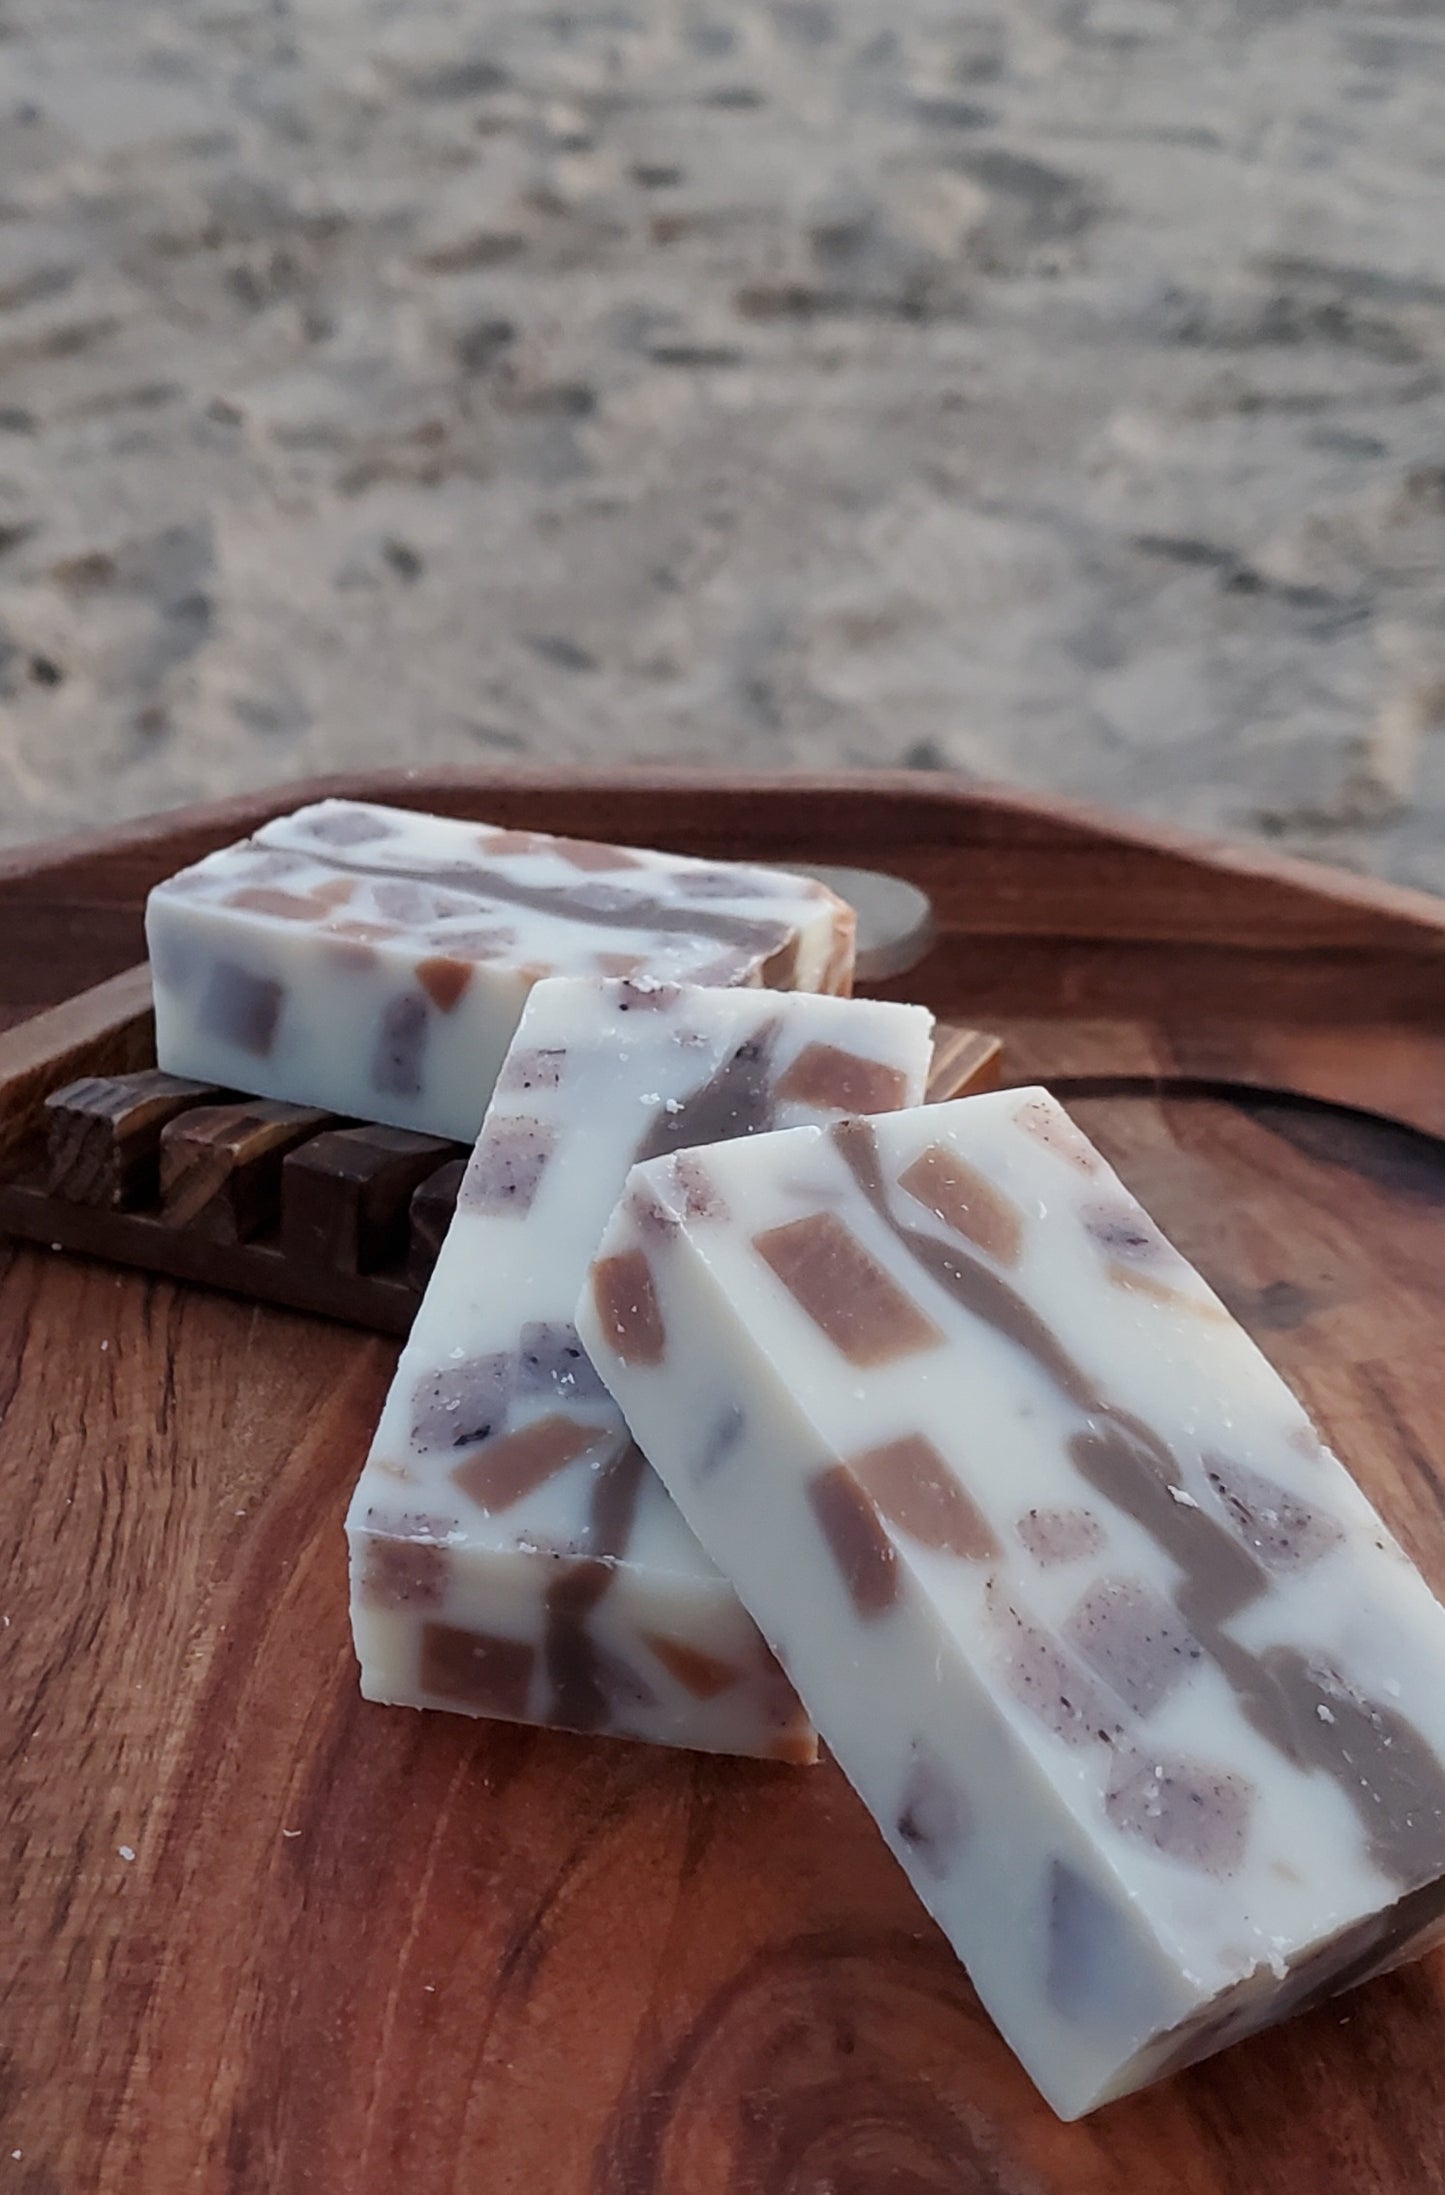 3 Calico All in One shampoo and body soap bars shown on a wooden tray, one bar is on a dark wooden soap dish.